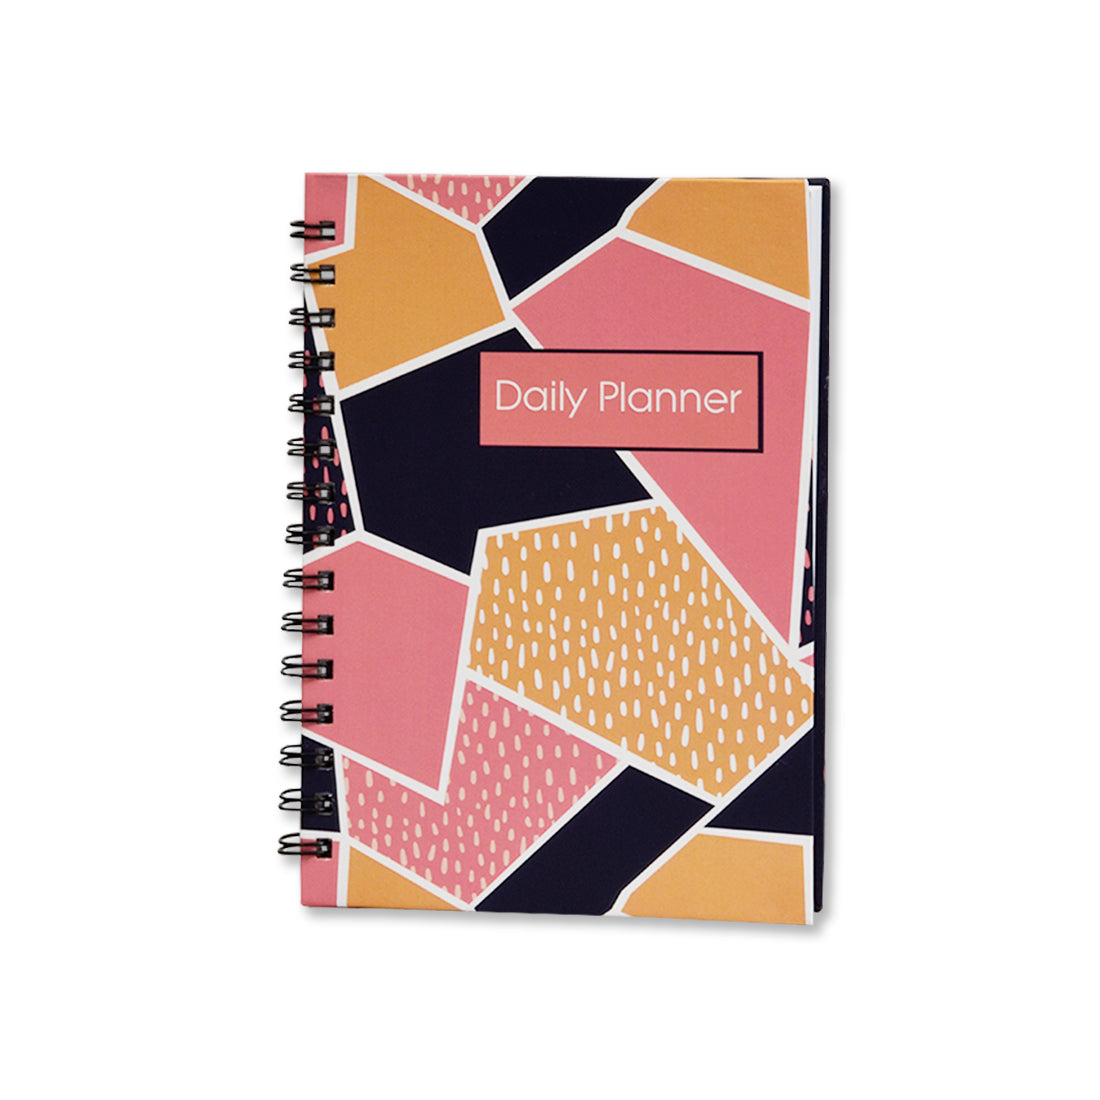 Daily Planner - Smart Planner Tested & Proven to Achieve Goals & Increase Productivity, Time Management, Undated Version (Multicolor)